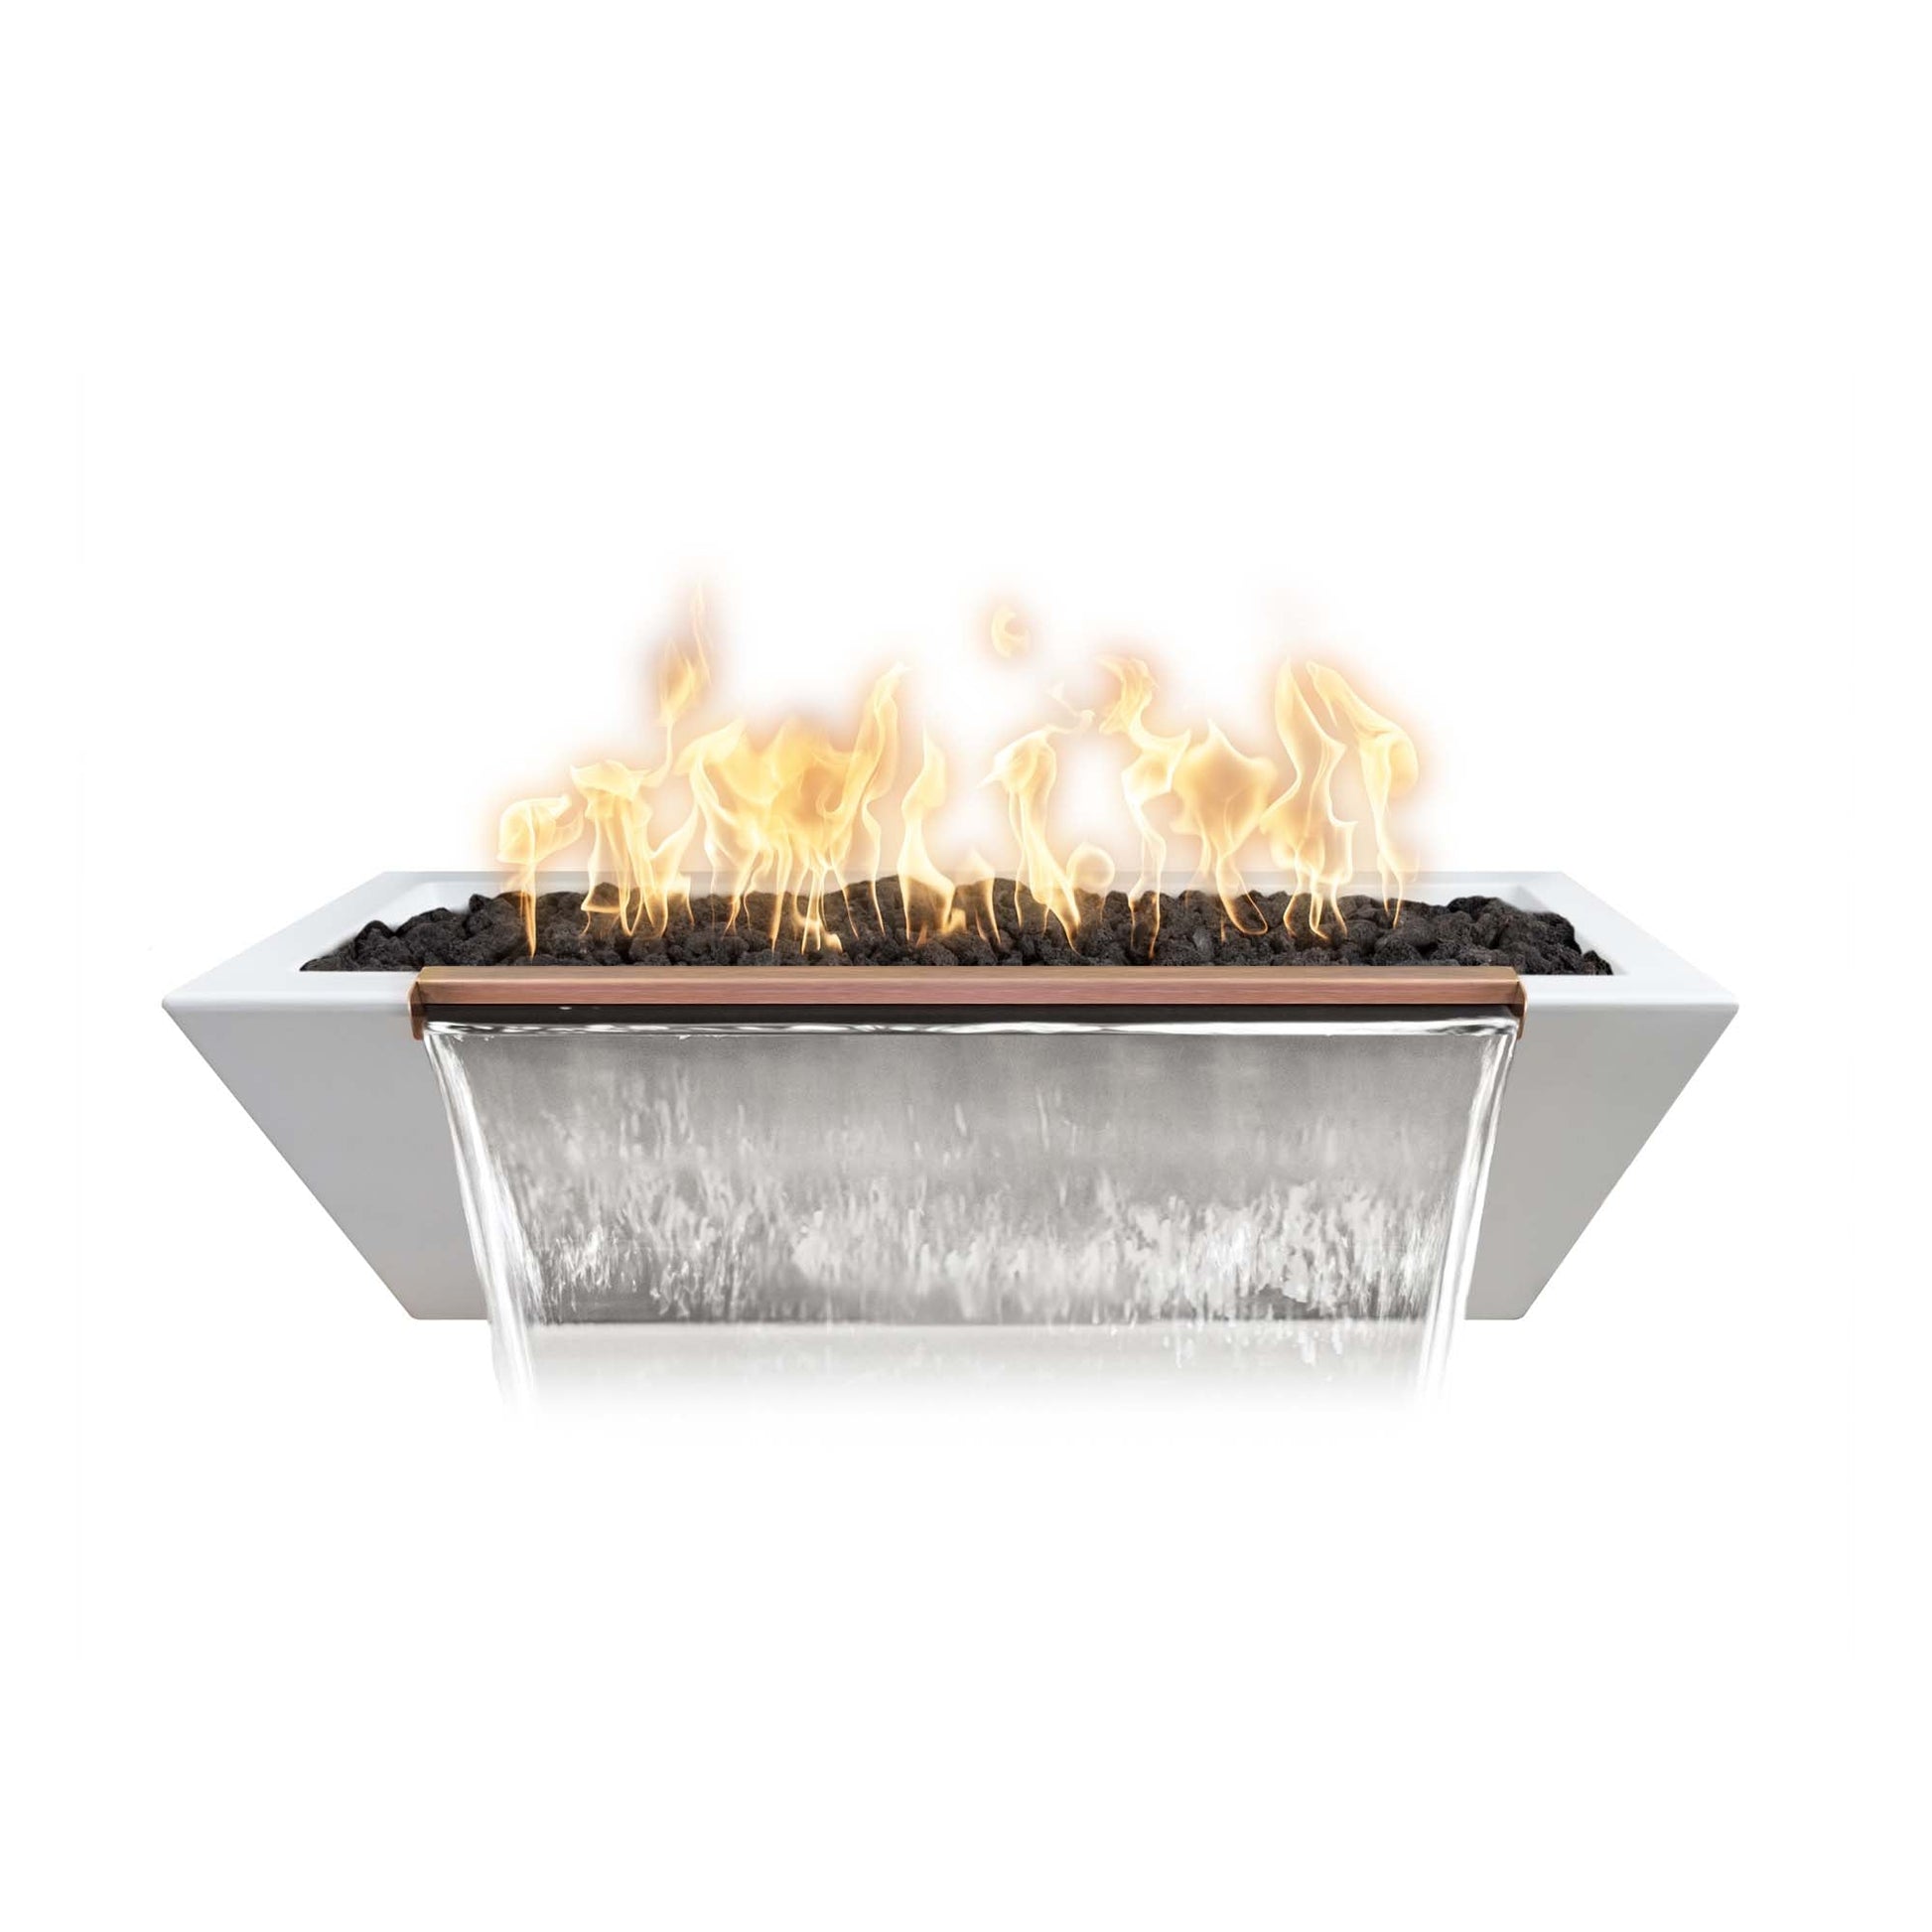 The Outdoor Plus Linear Maya 72" Chocolate GFRC Concrete Natural Gas Fire & Water Bowl with Match Lit Ignition